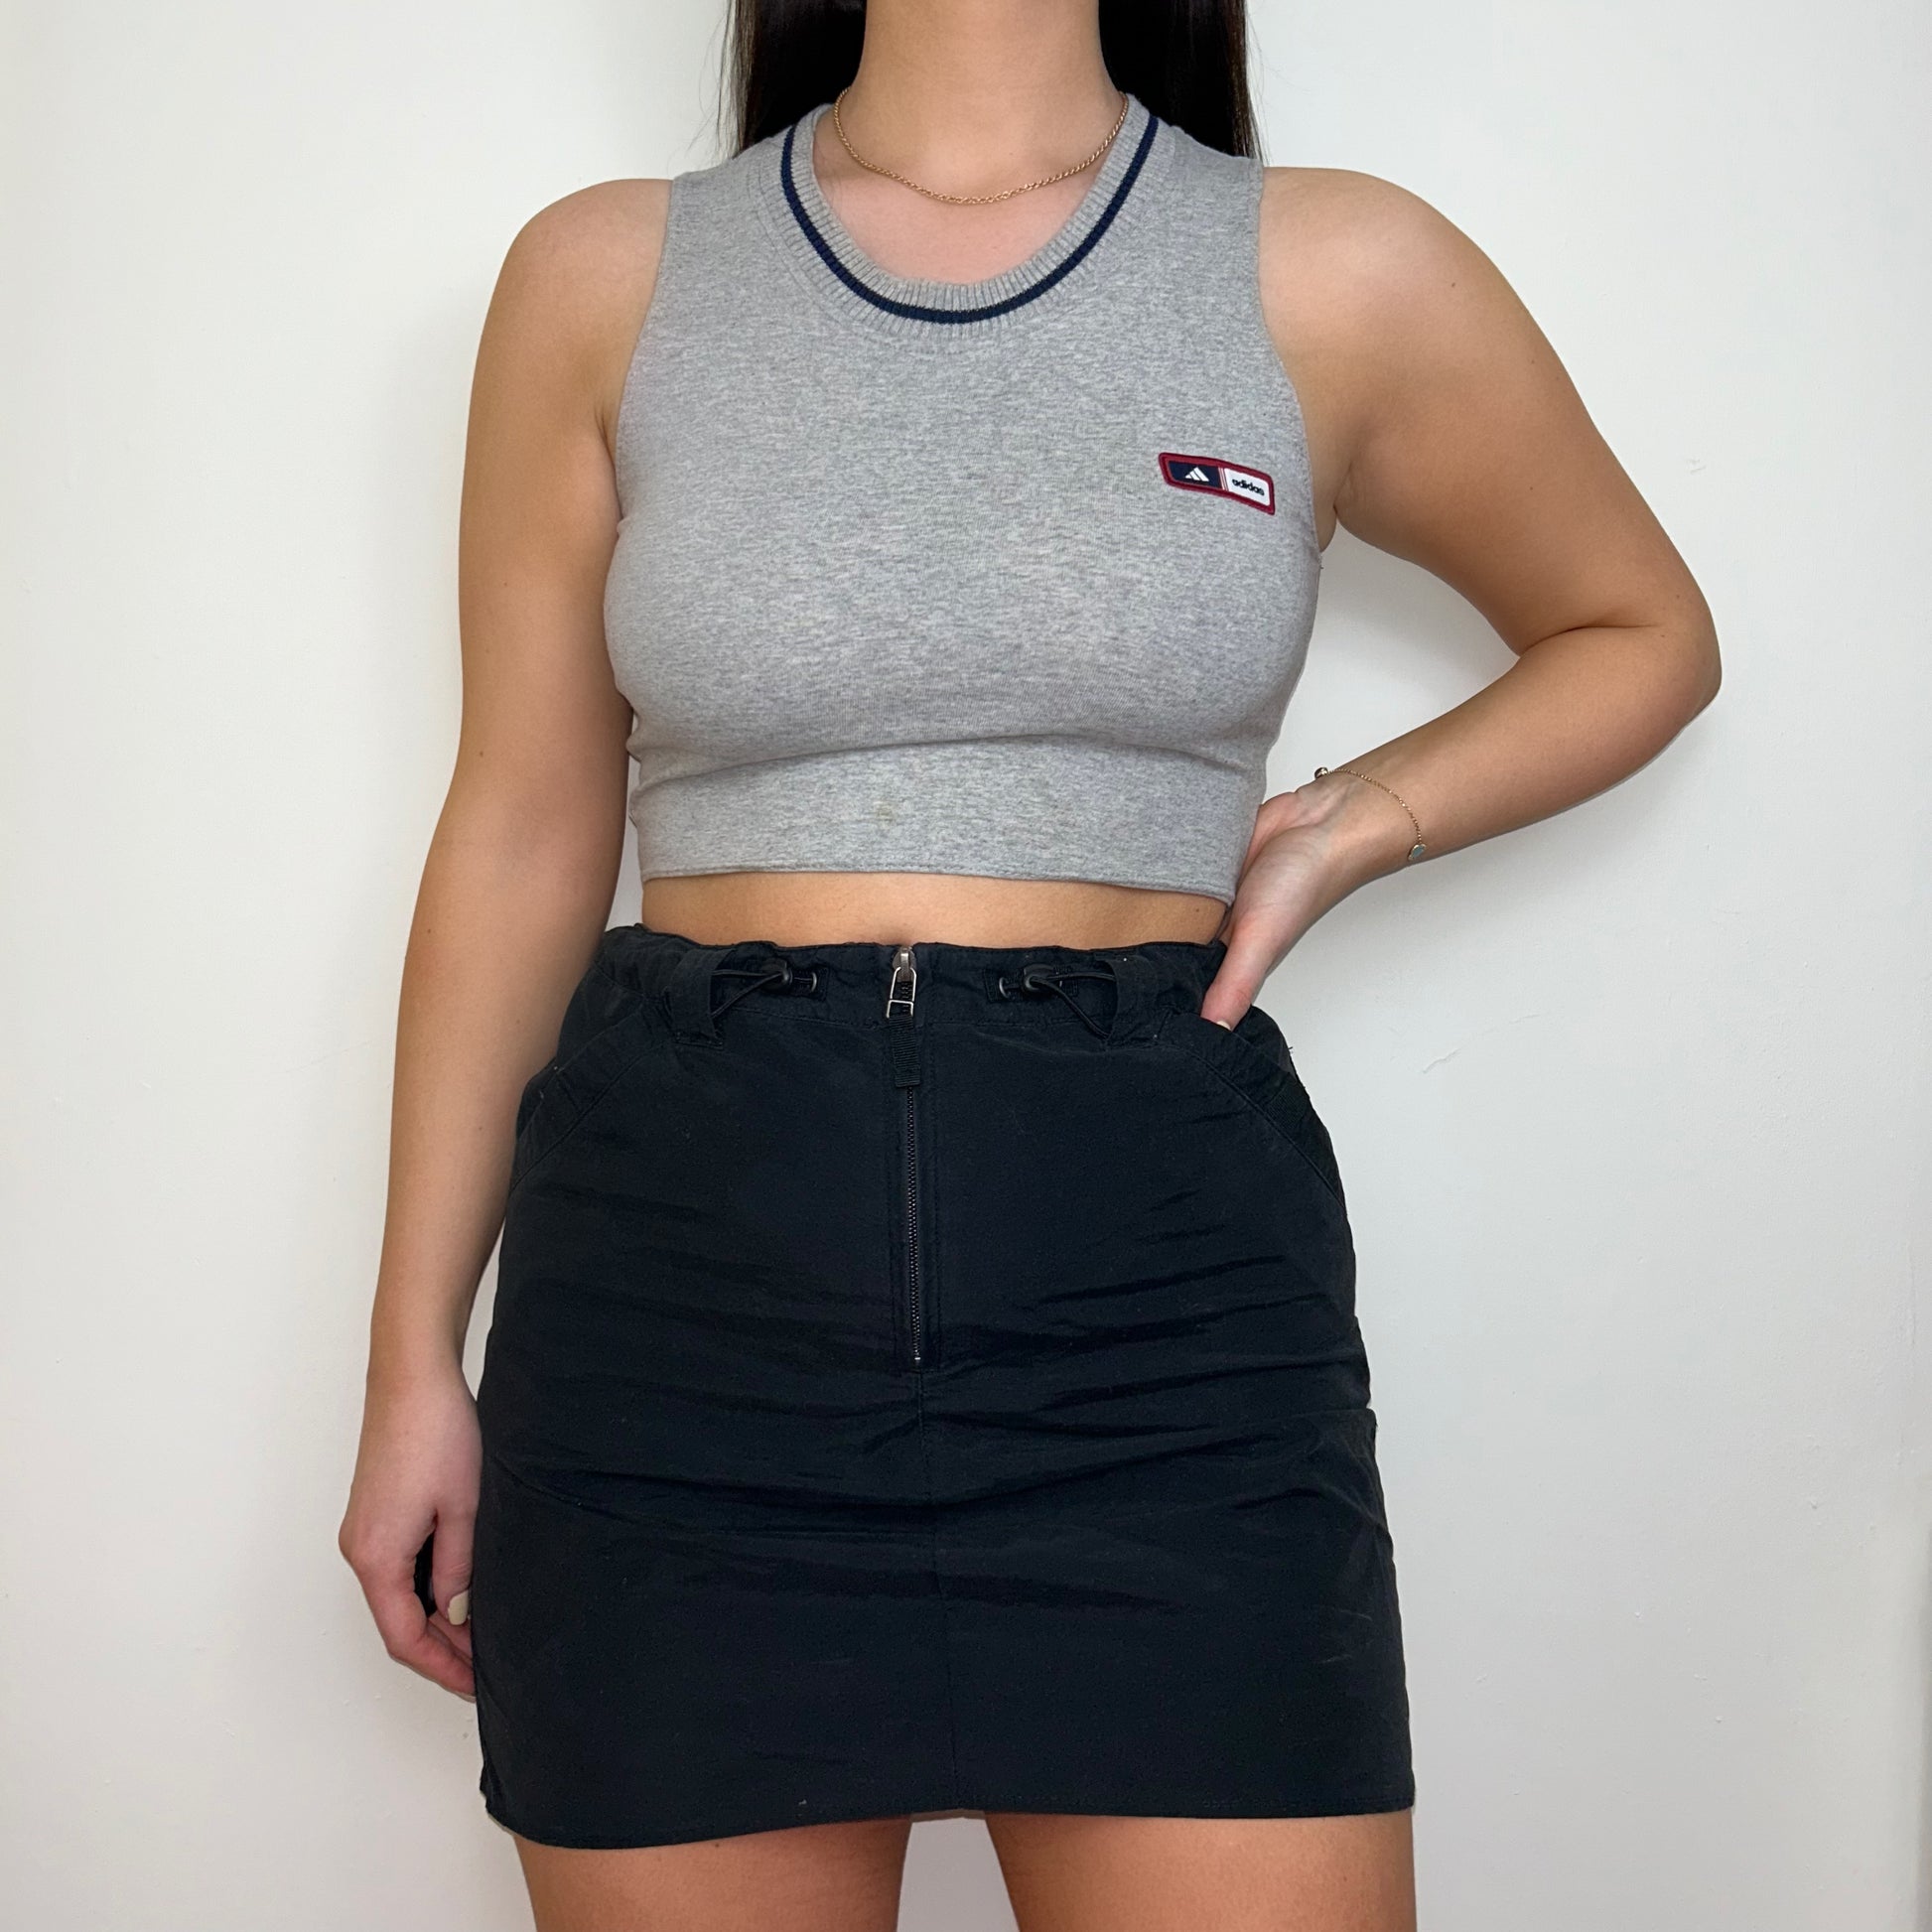 grey sleeveless crop top with small adidas logo shown on a model wearing a black mini skirt